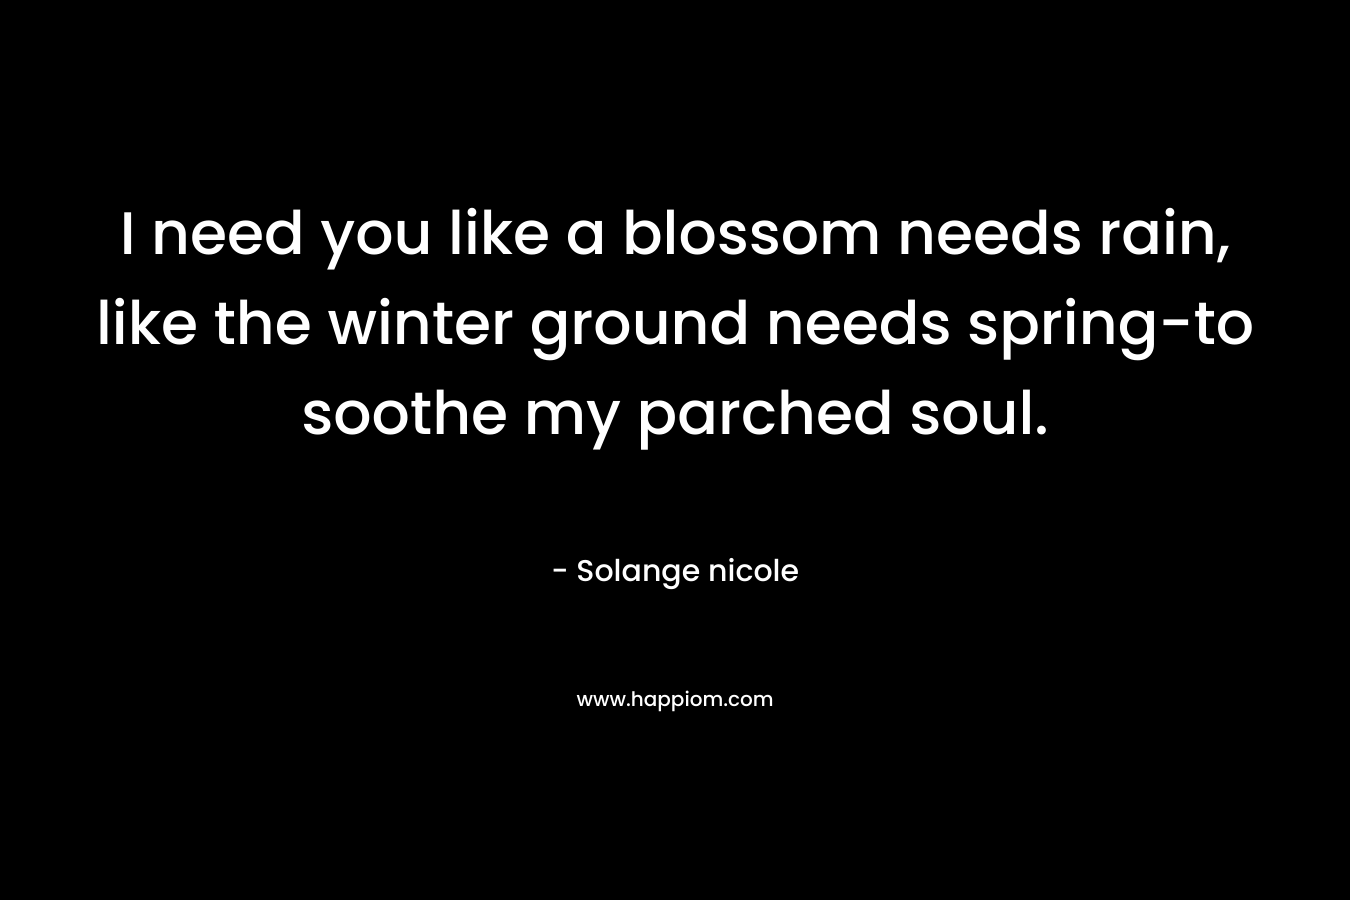 I need you like a blossom needs rain, like the winter ground needs spring-to soothe my parched soul.